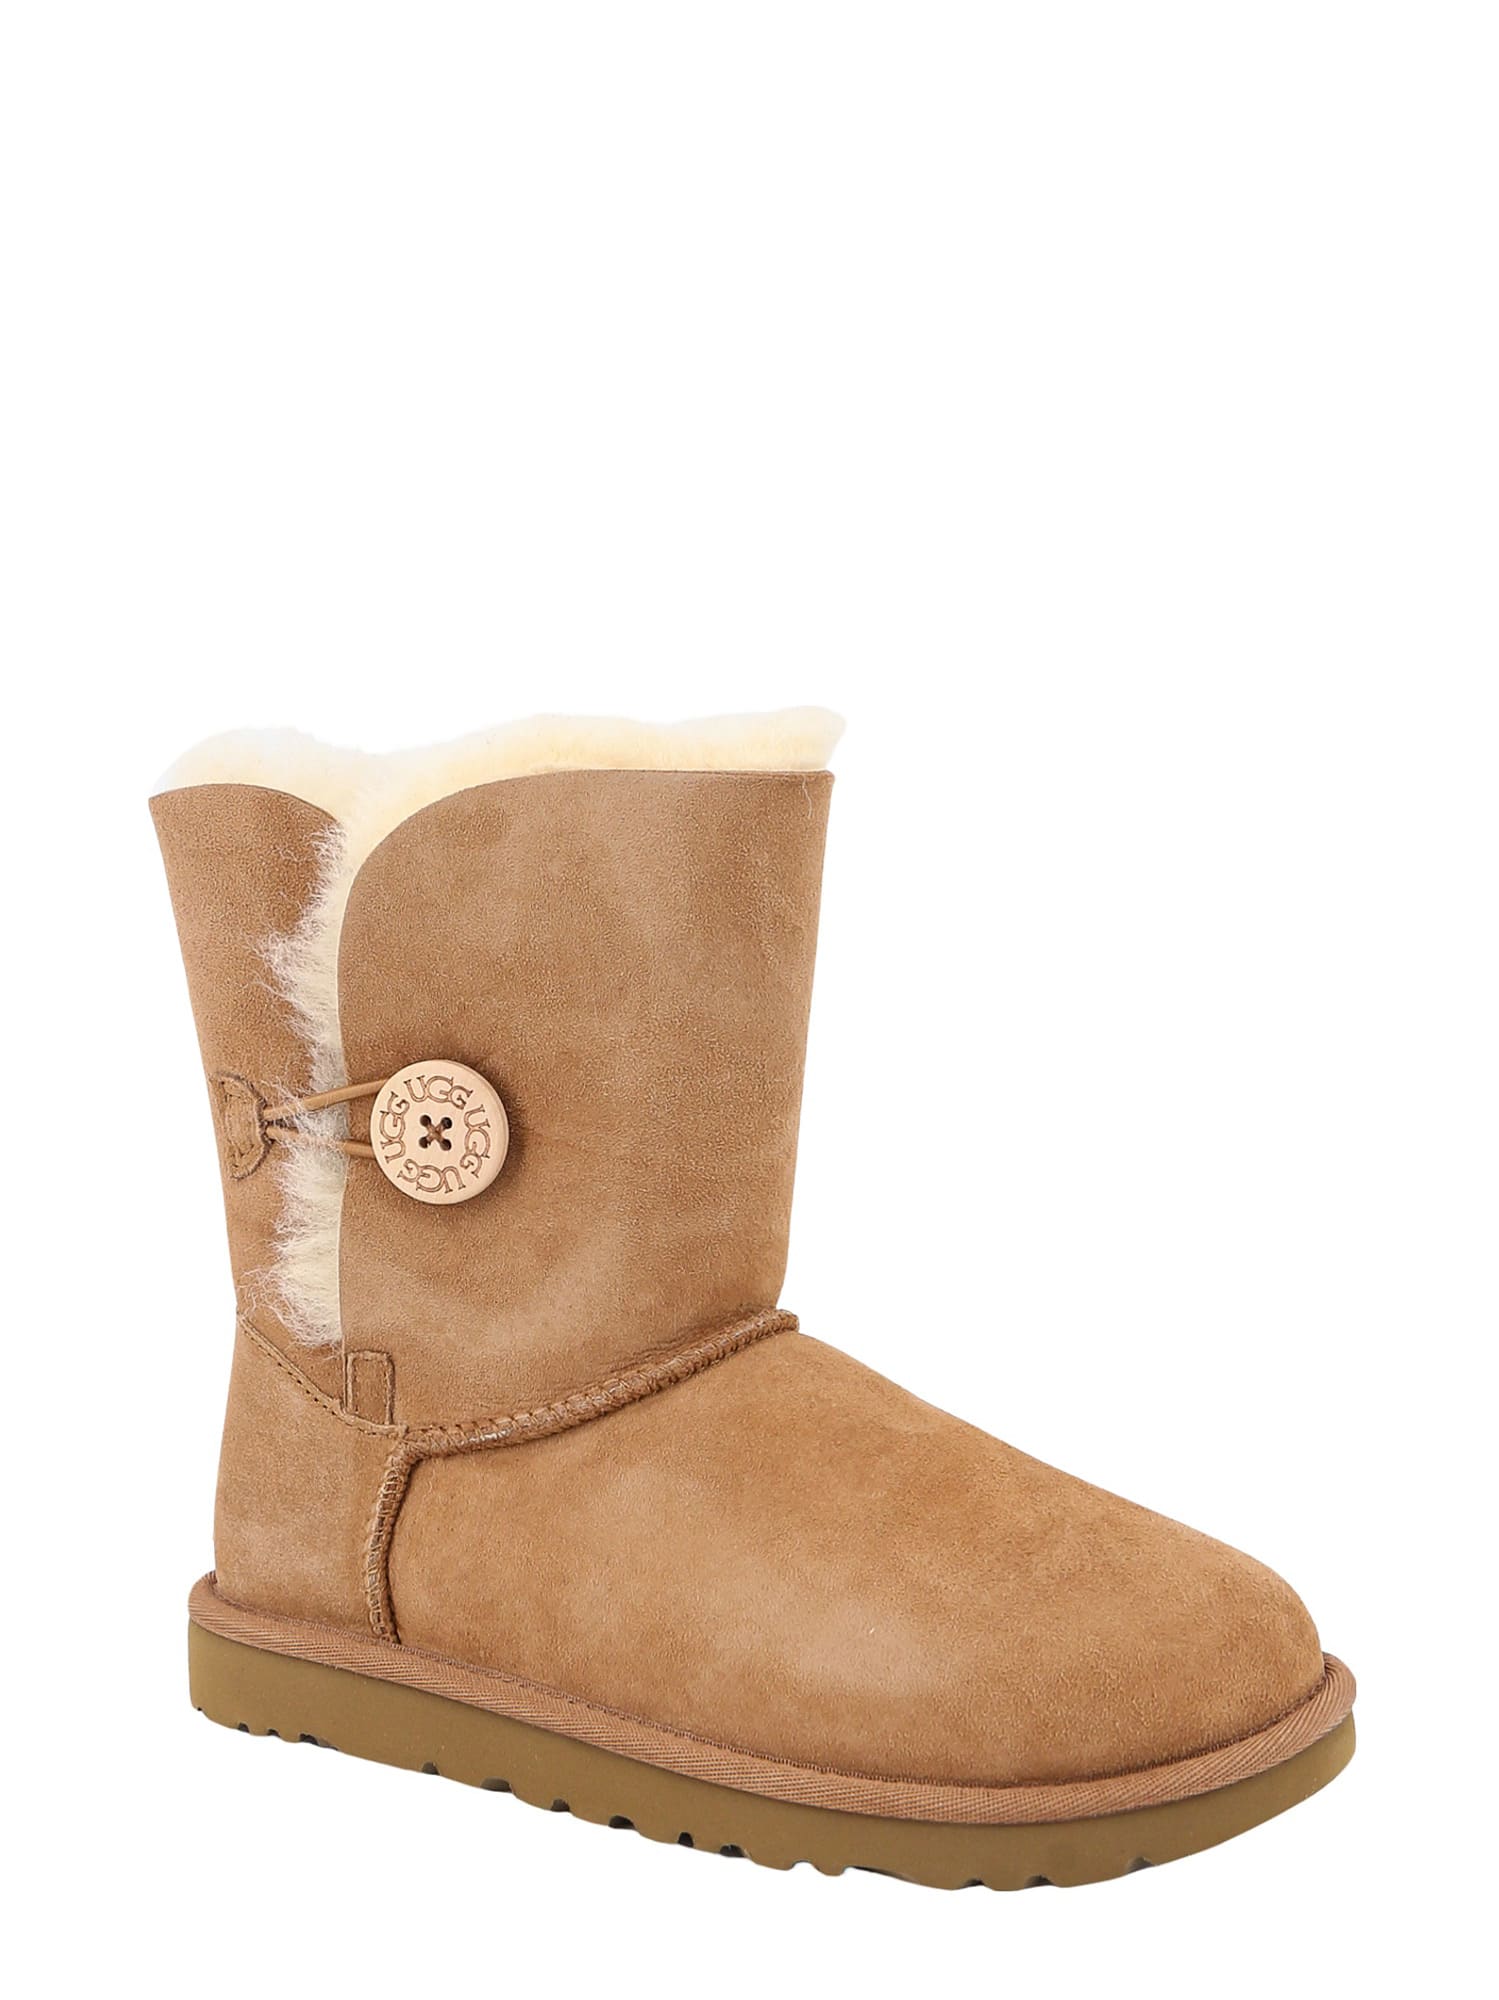 Shop Ugg Bailey Button Boots In Beige